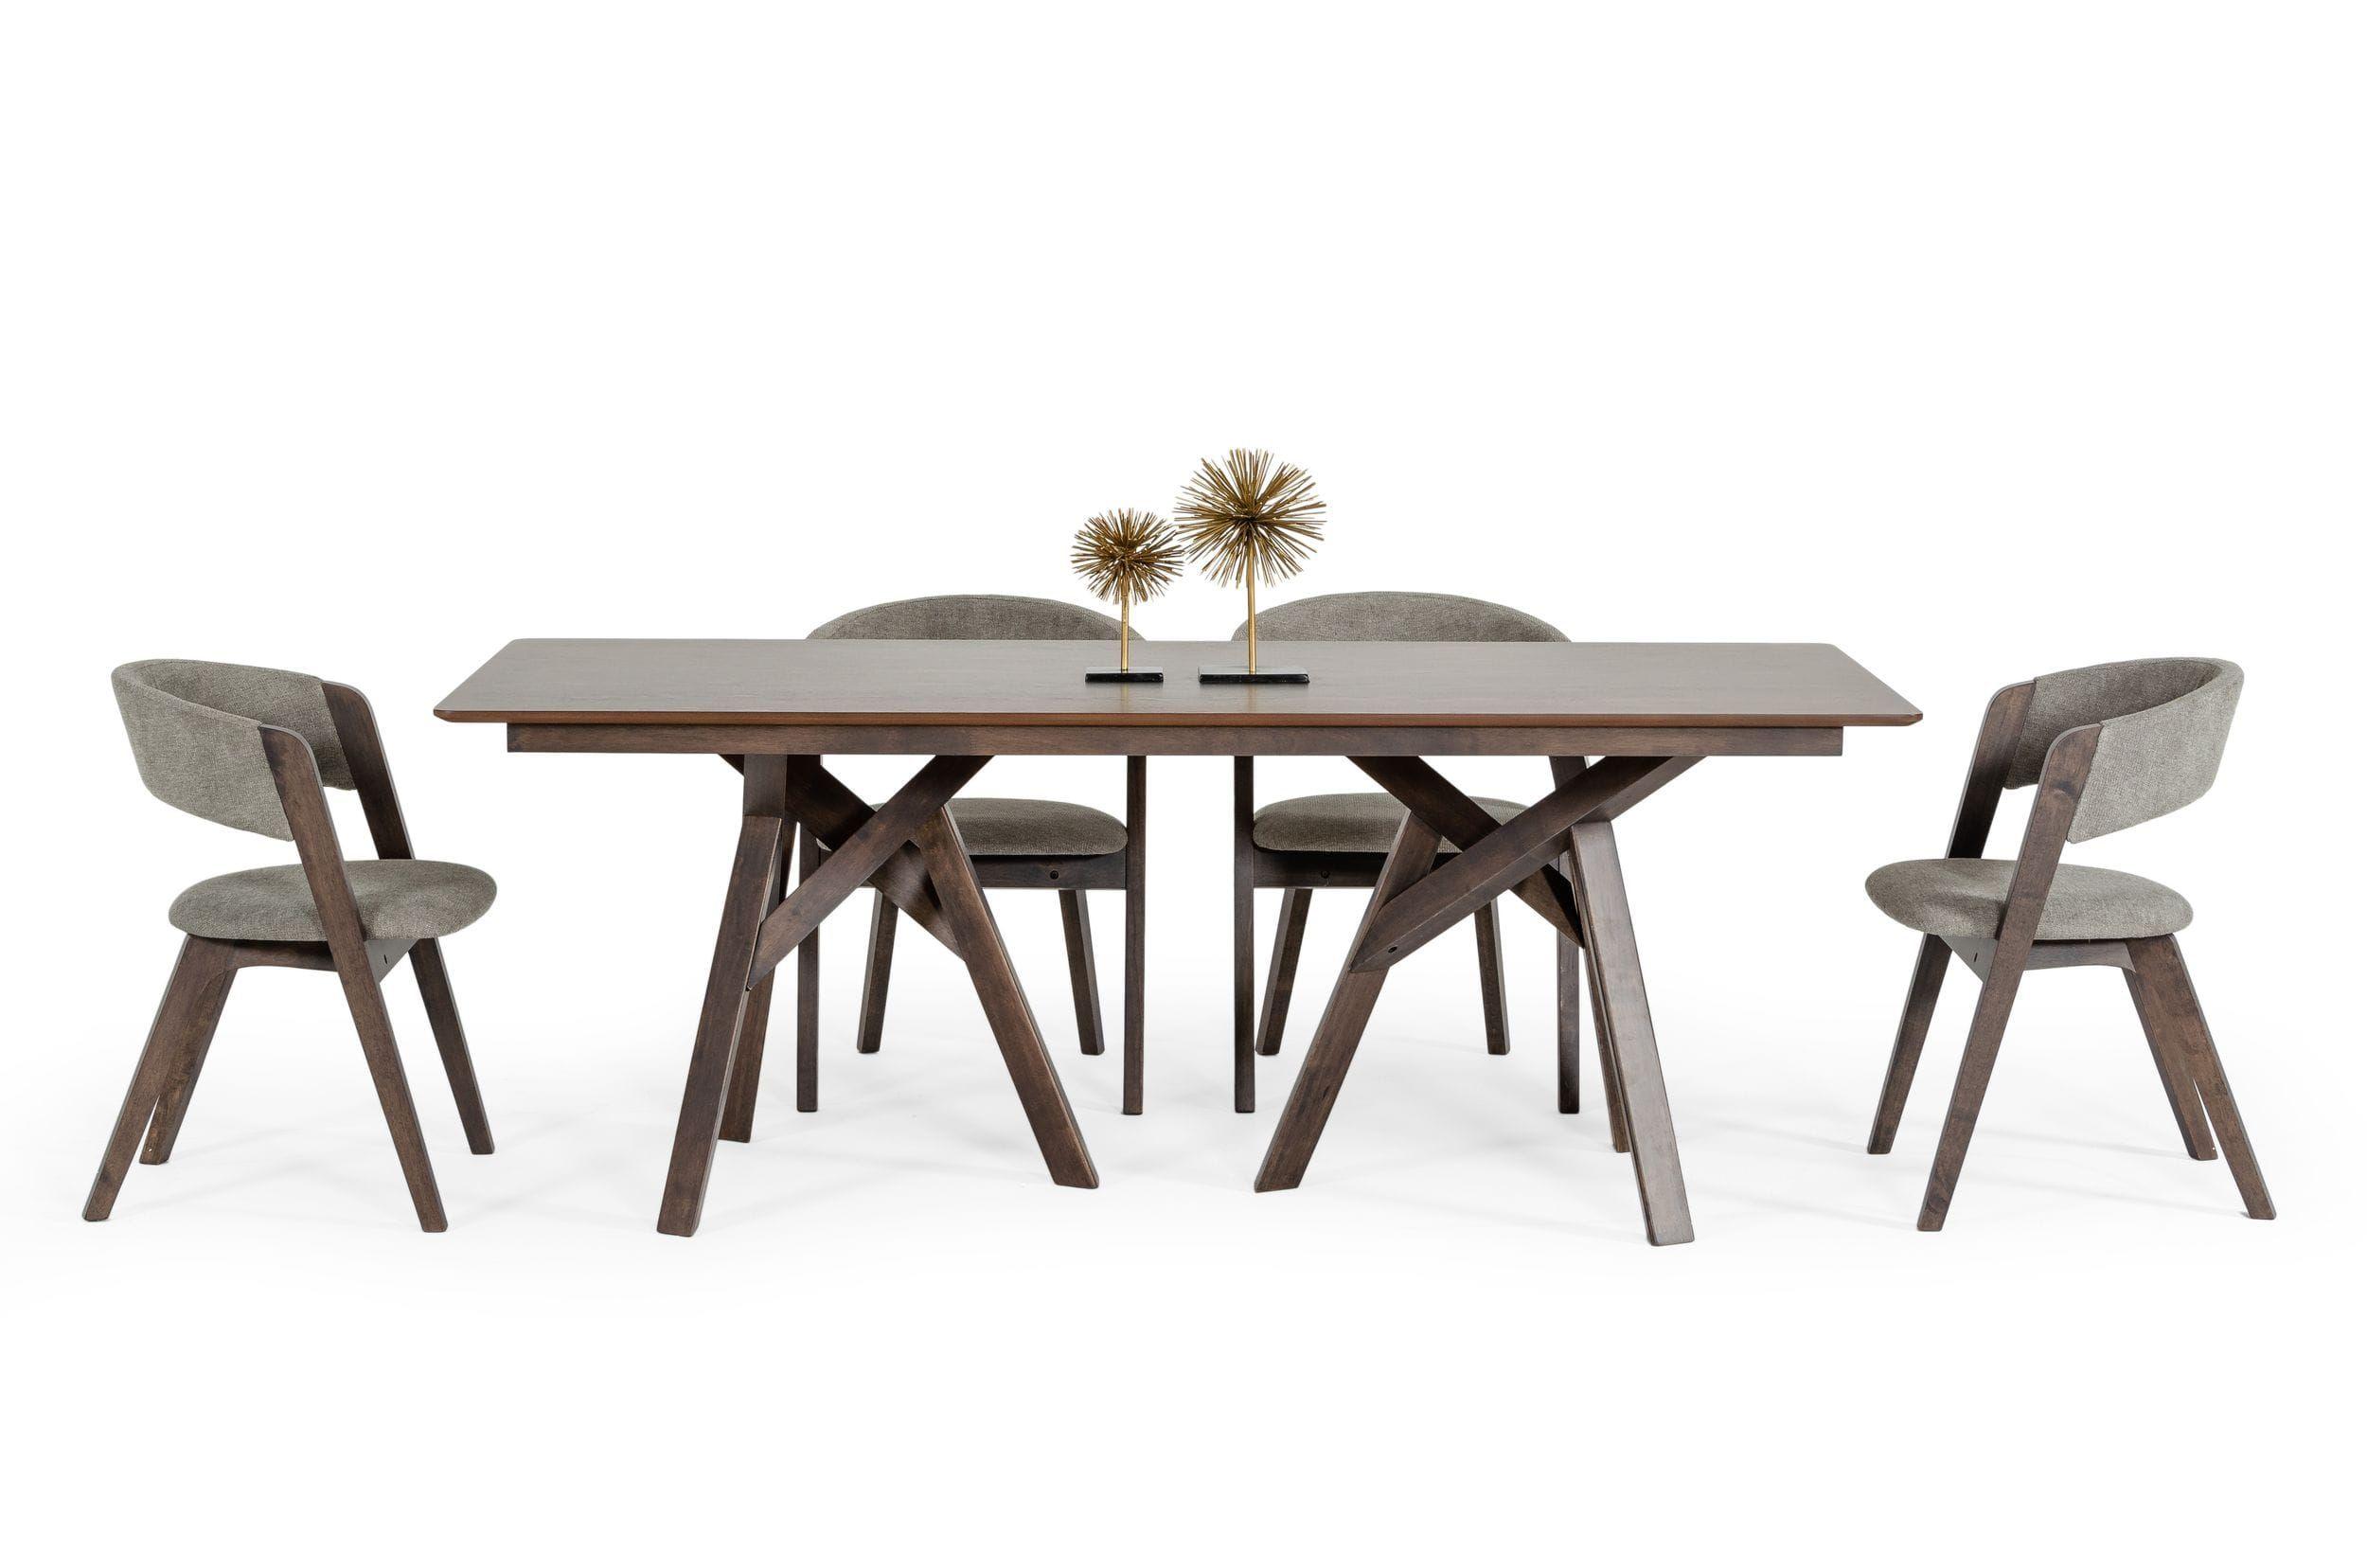 Contemporary, Modern Dining Room Set Grover VGMA-MIT-5222-5pcs in Dark Brown, Gray Fabric